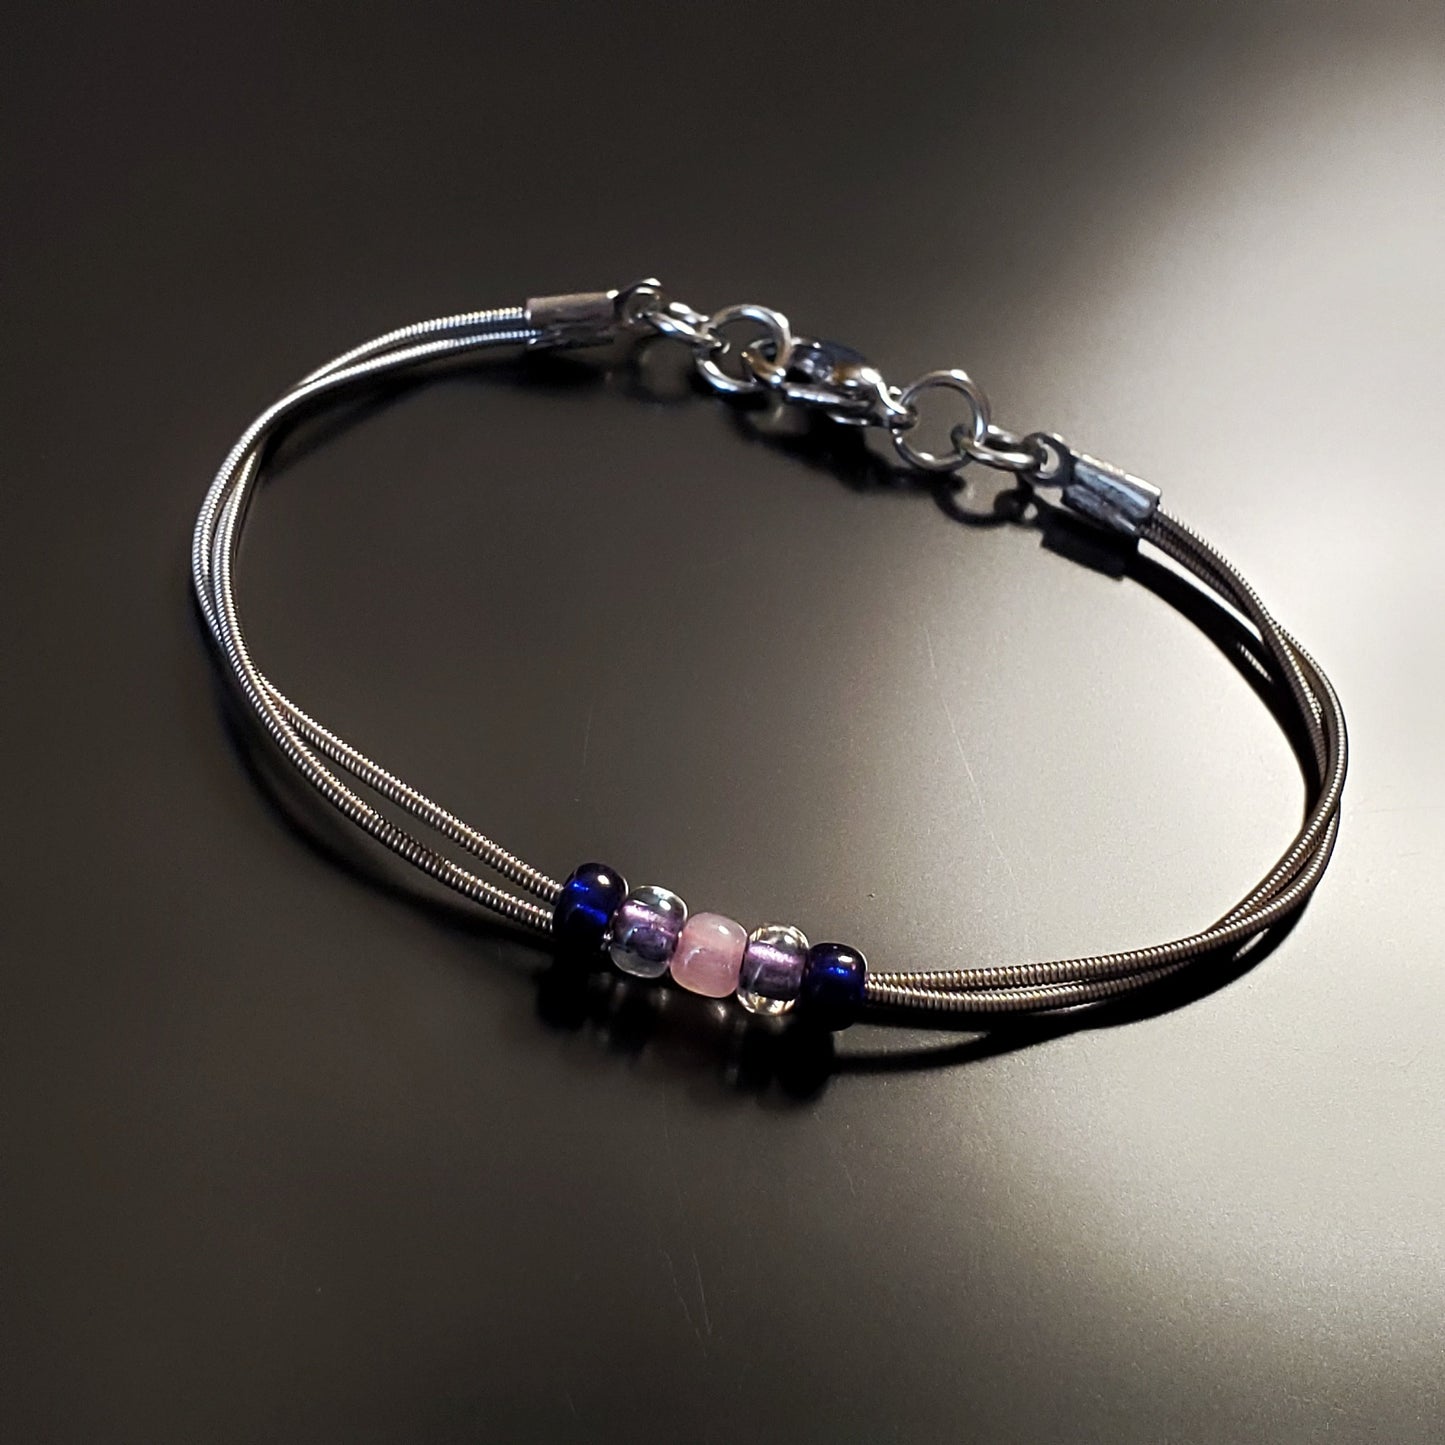 guitar string bracelet with blue, purple and pink bead representing the bisexual pride flag -black background